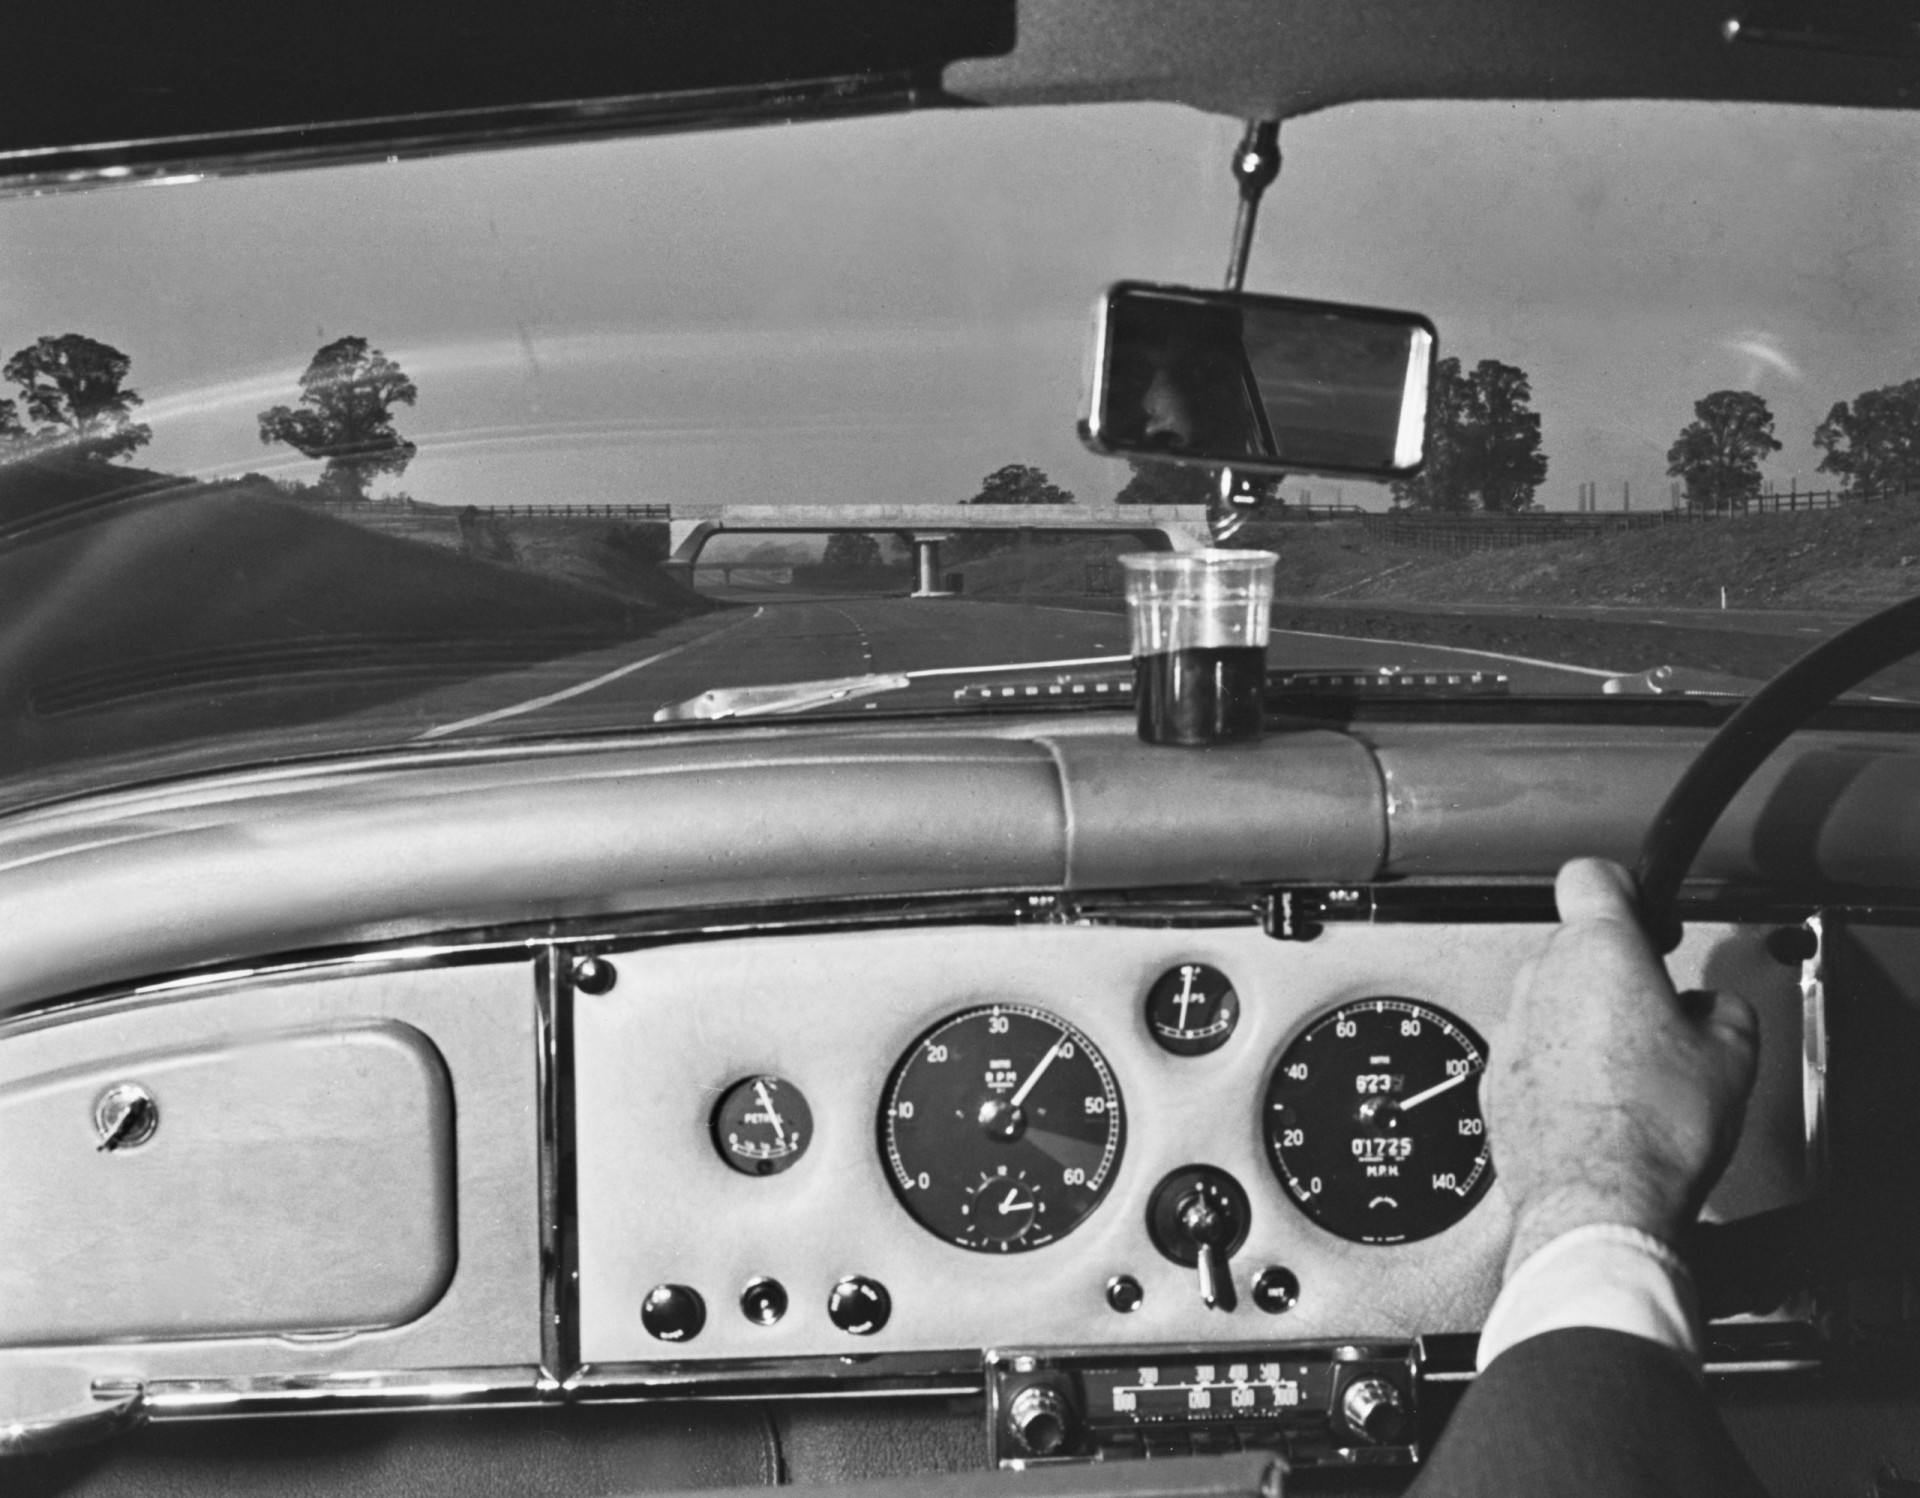 <p>A view from inside a car traveling along the first stretch of the new M1 motorway on November 2, 1959. The vehicle is being driven at over 100 miles per hour (160 km/h). In those days, there was no speed limit on the motorway.</p><p>You may also like:<a href="https://www.starsinsider.com/n/477854?utm_source=msn.com&utm_medium=display&utm_campaign=referral_description&utm_content=697904en-us"> Famous people who had to flee their home countries</a></p>